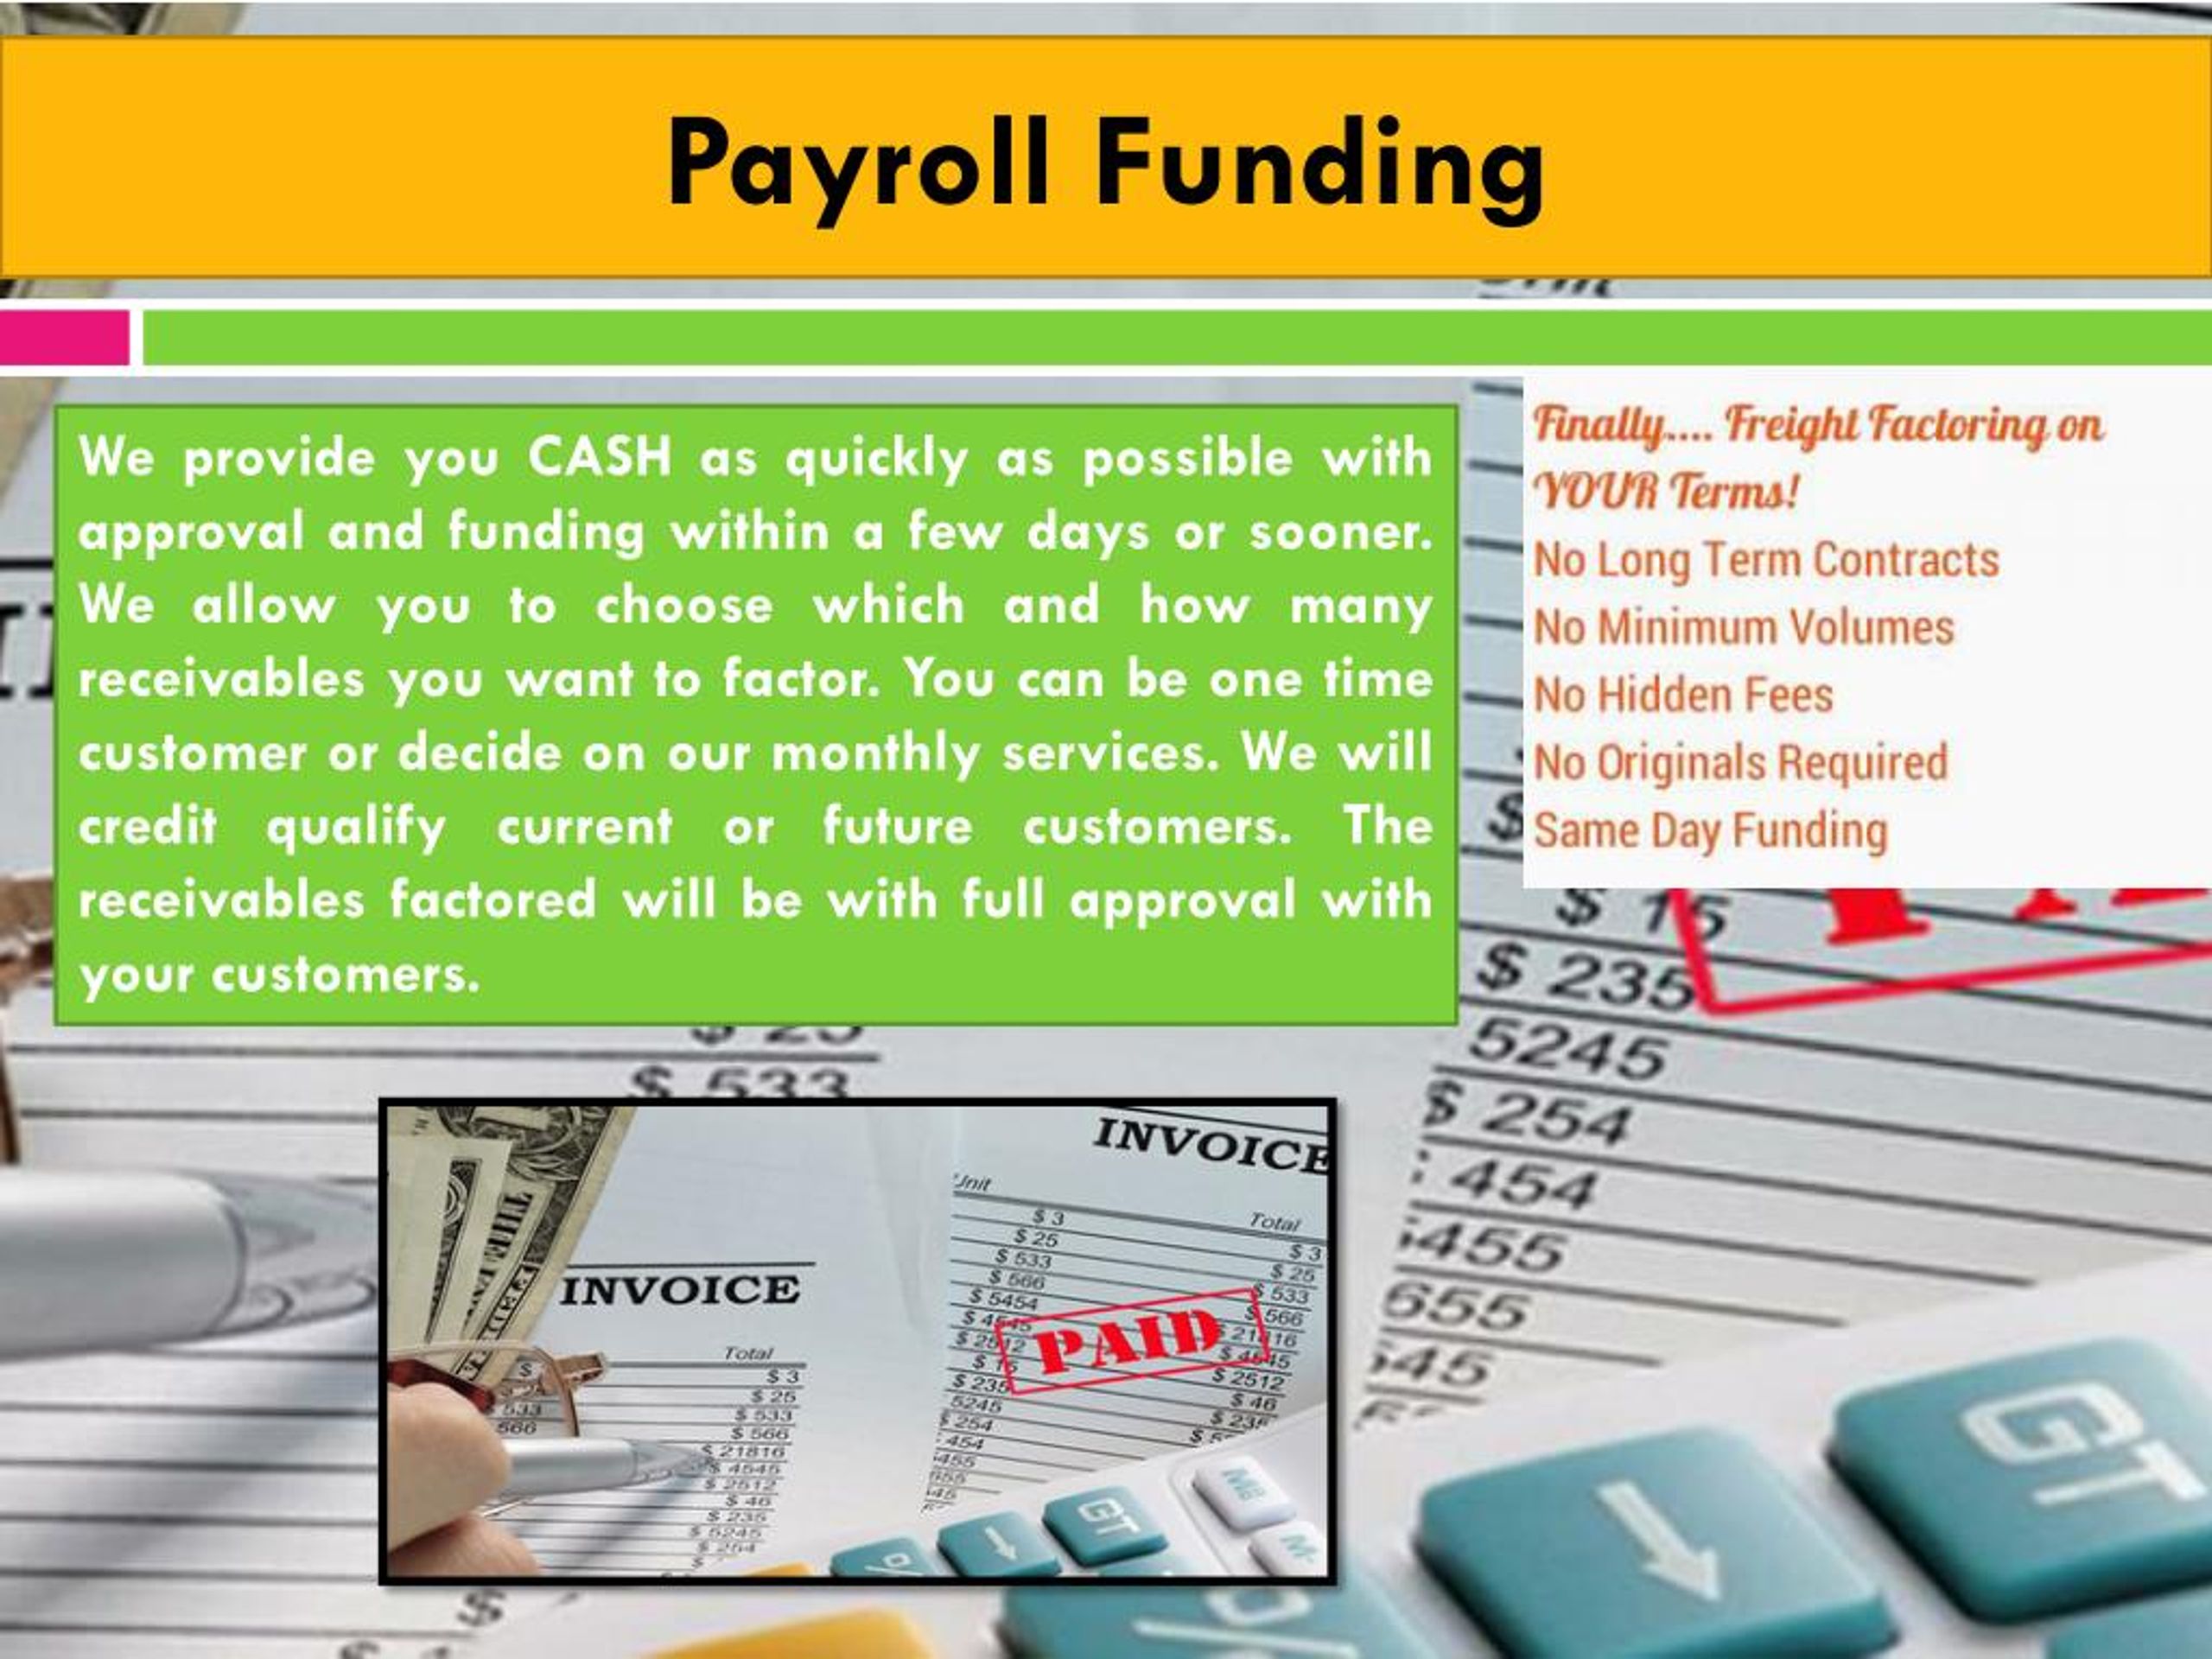 PPT Payroll Funding For Staffing Companies PowerPoint Presentation, free download ID7244290